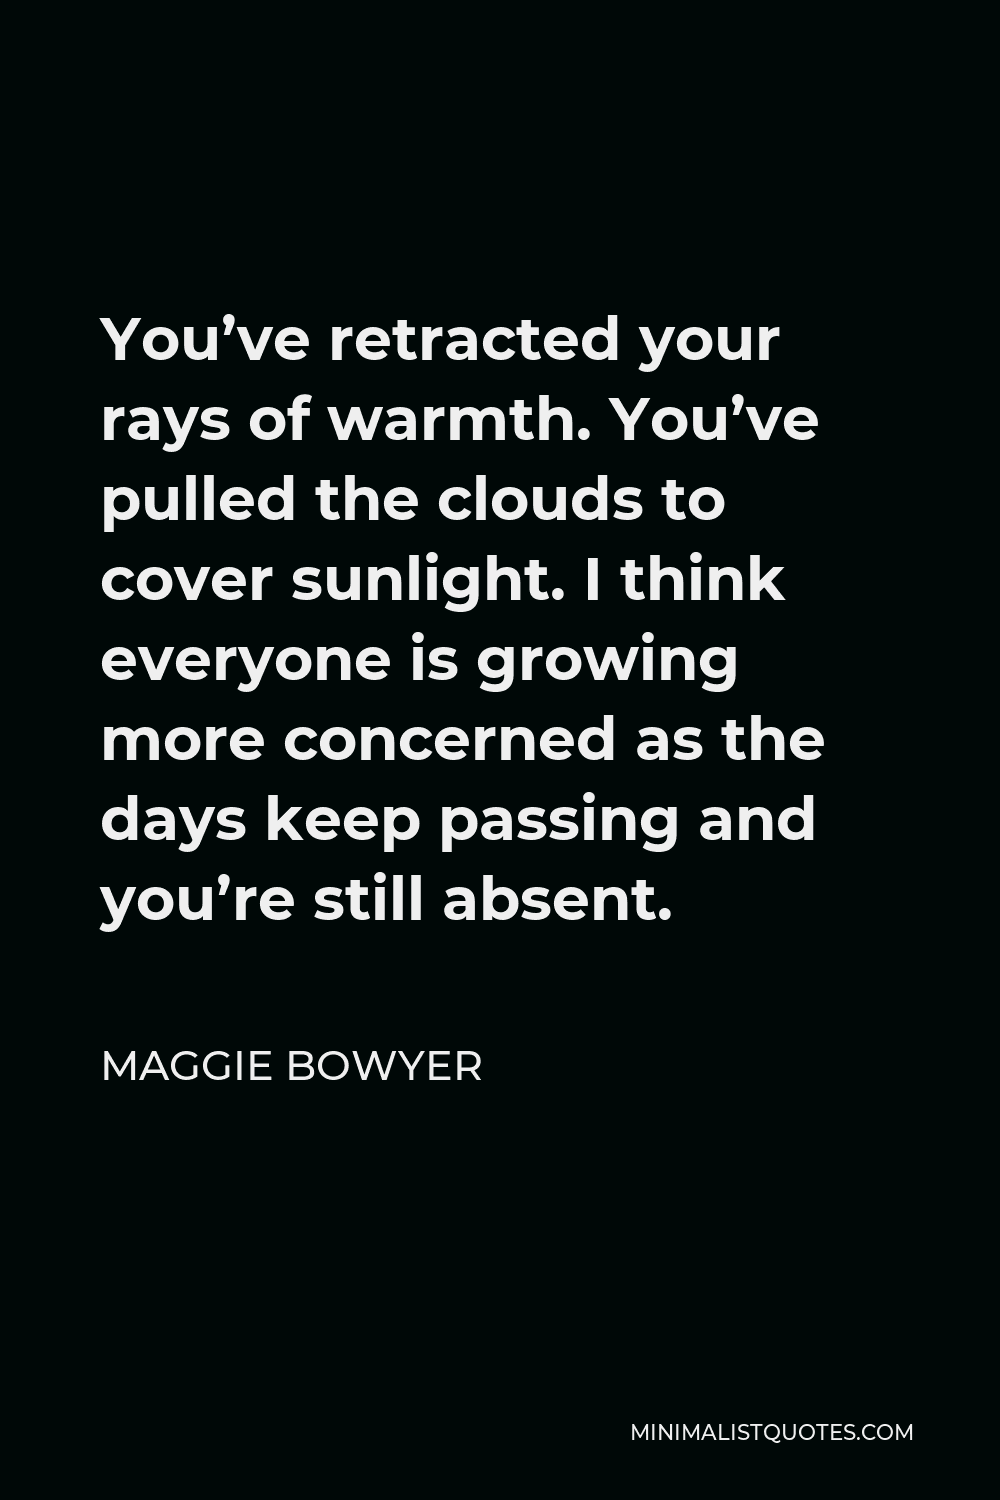 Maggie Bowyer Quote - You’ve retracted your rays of warmth. You’ve pulled the clouds to cover sunlight. I think everyone is growing more concerned as the days keep passing and you’re still absent.